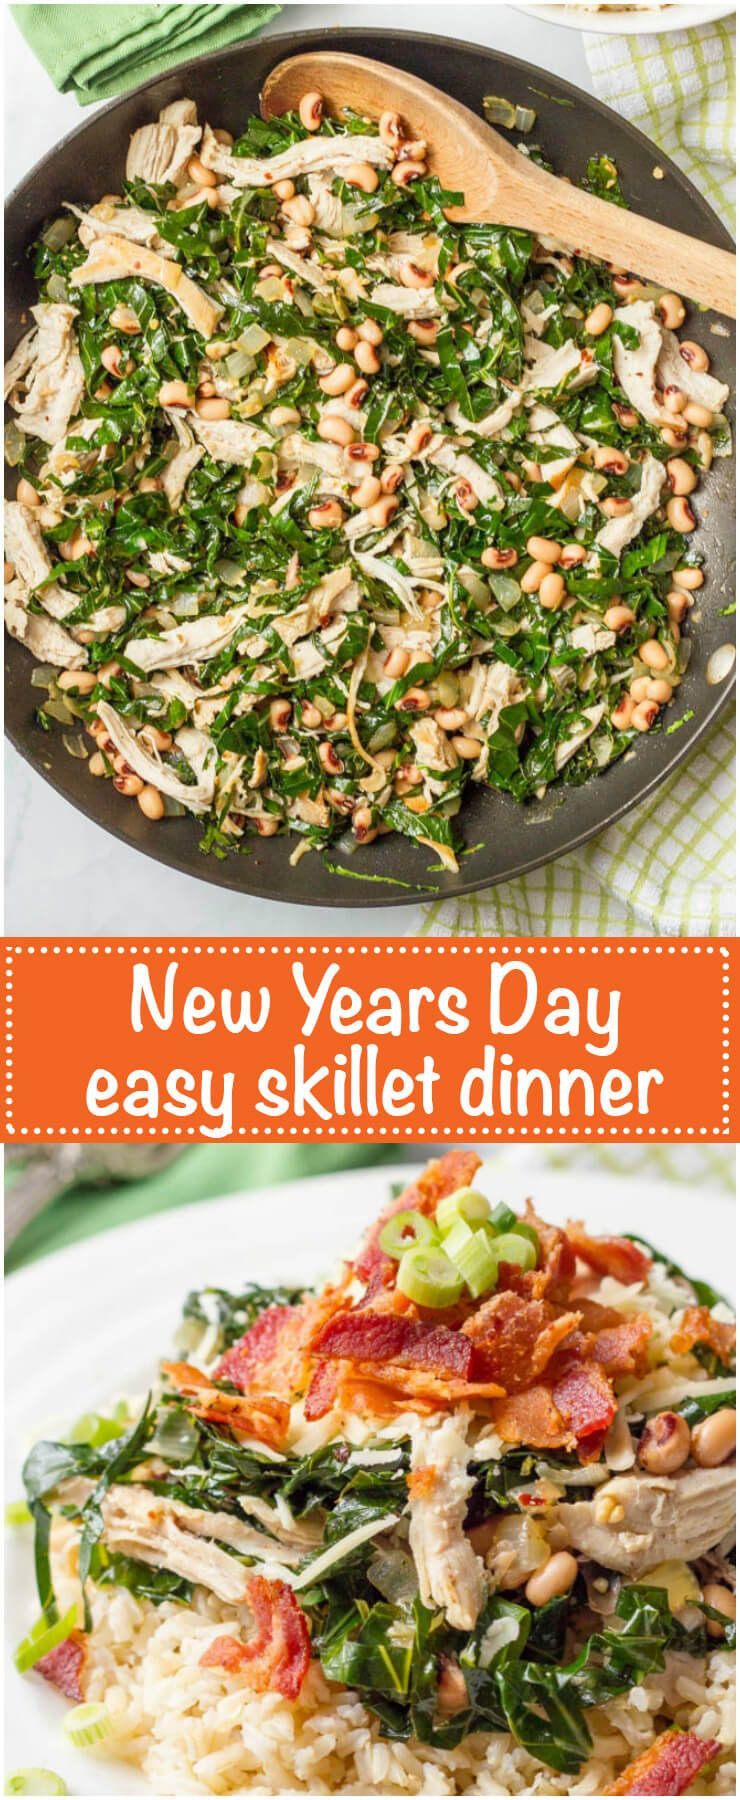 New Years Day Dinner Ideas
 Southern New Year s Day dinner skillet Recipe